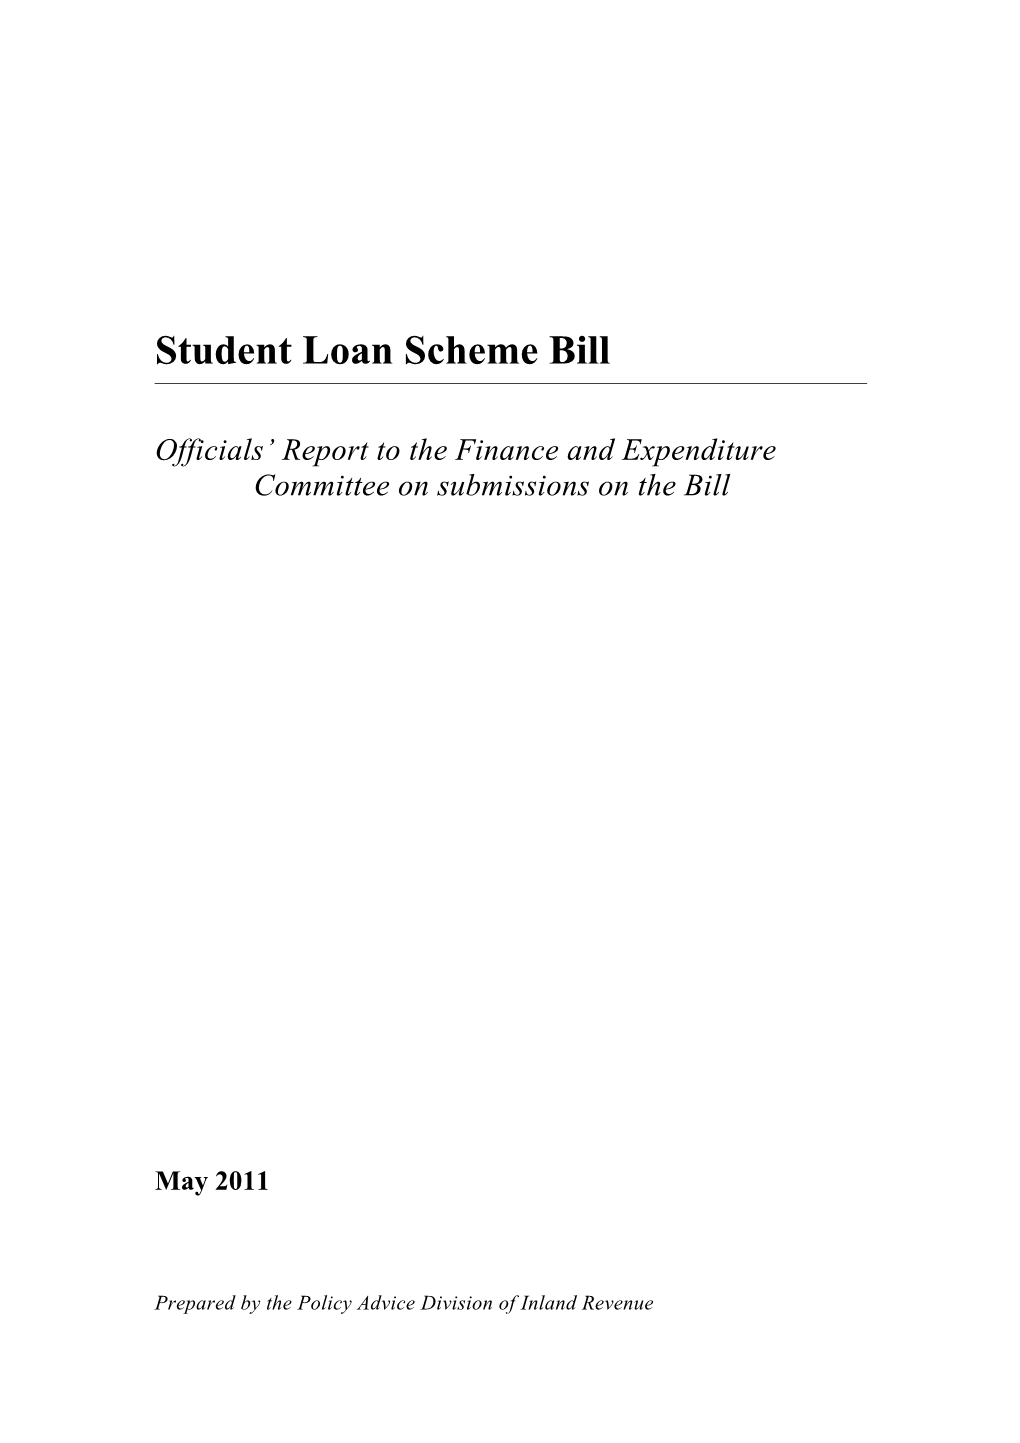 Student Loan Scheme Bill - Officials Report to the Finance and Expenditure Committee On